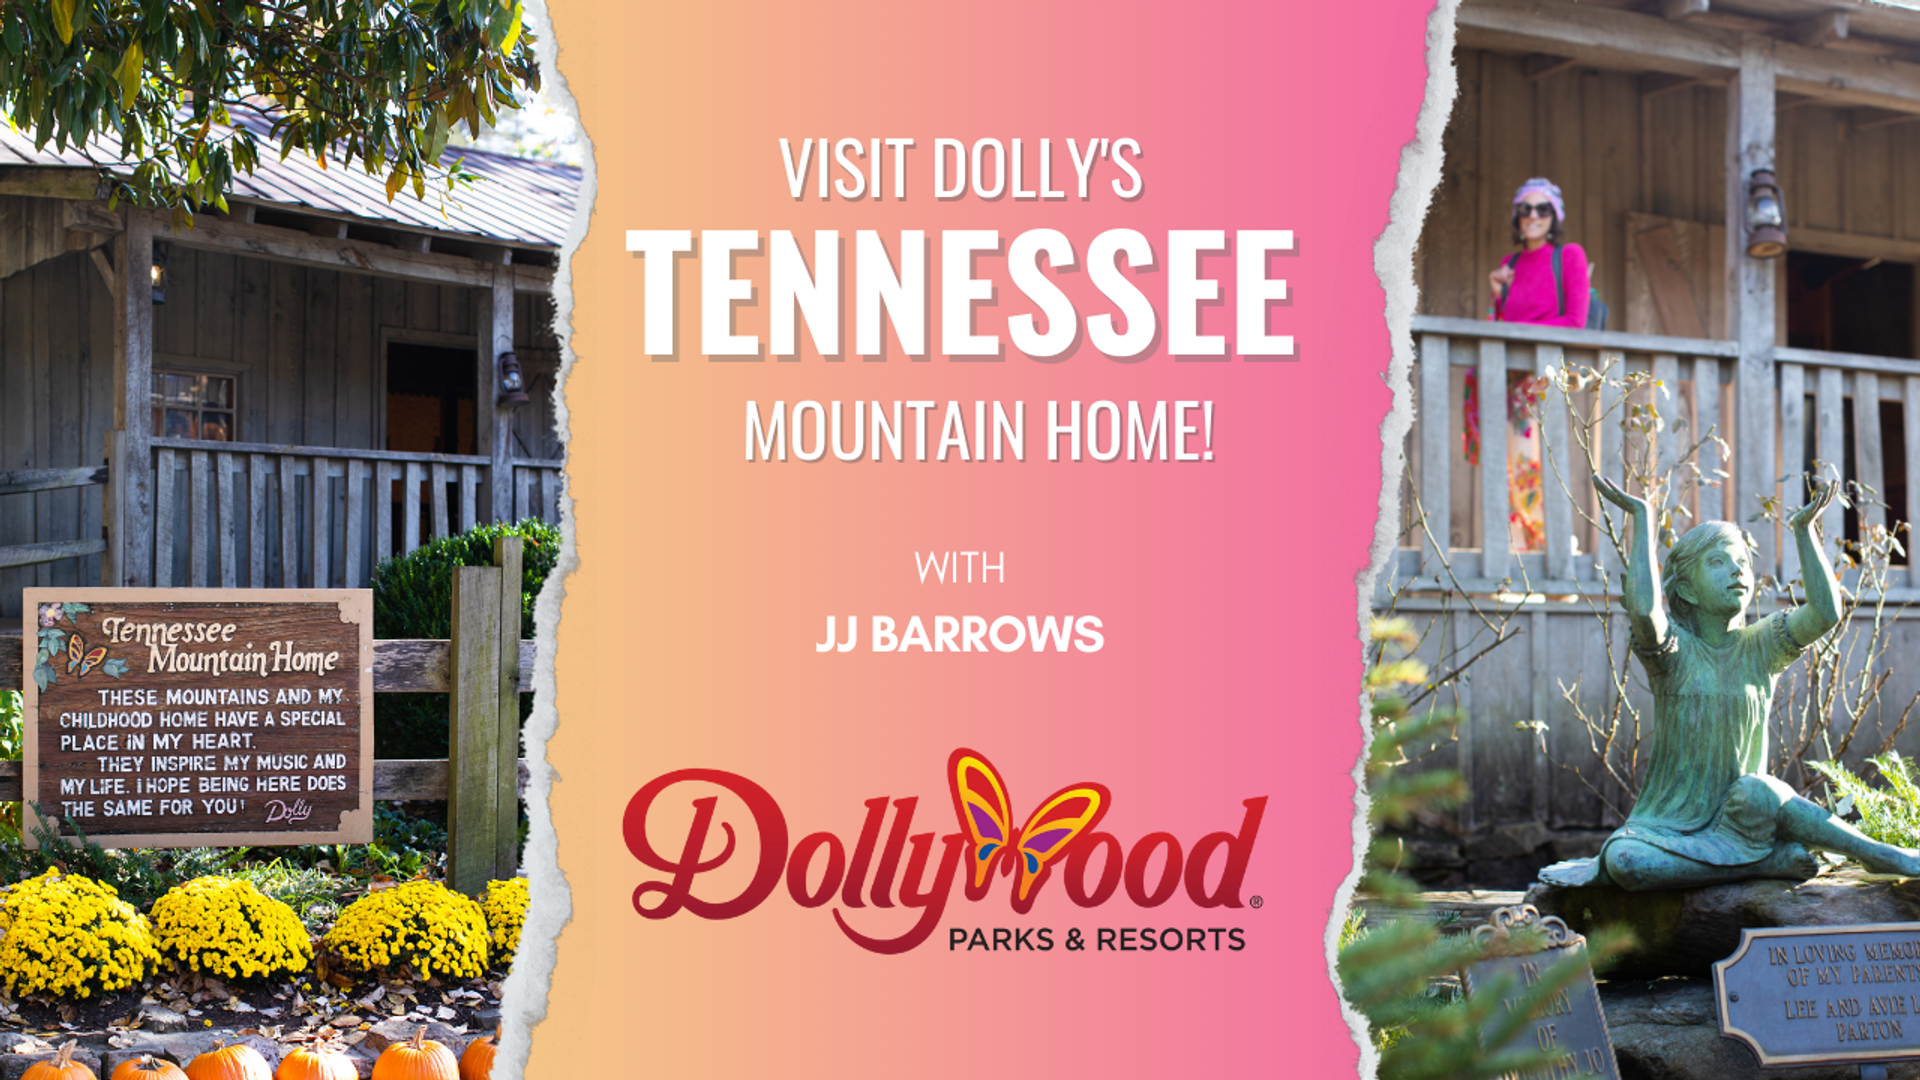 Dolly’s Tennessee Mountain Home